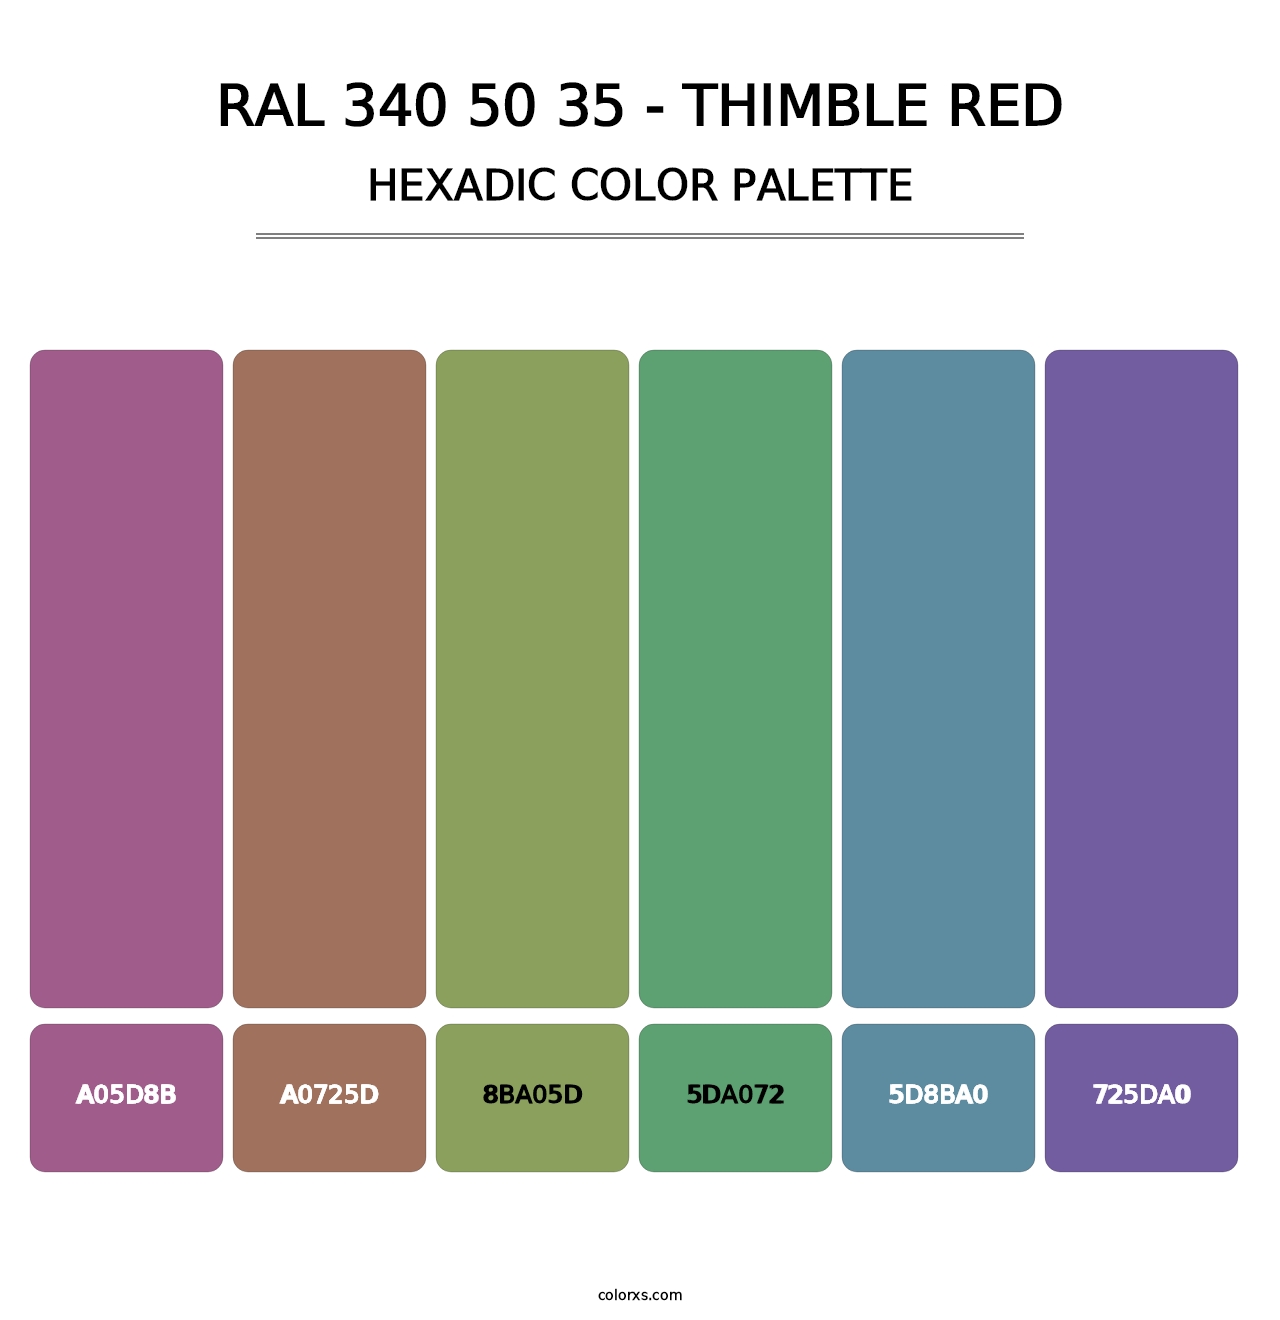 RAL 340 50 35 - Thimble Red - Hexadic Color Palette